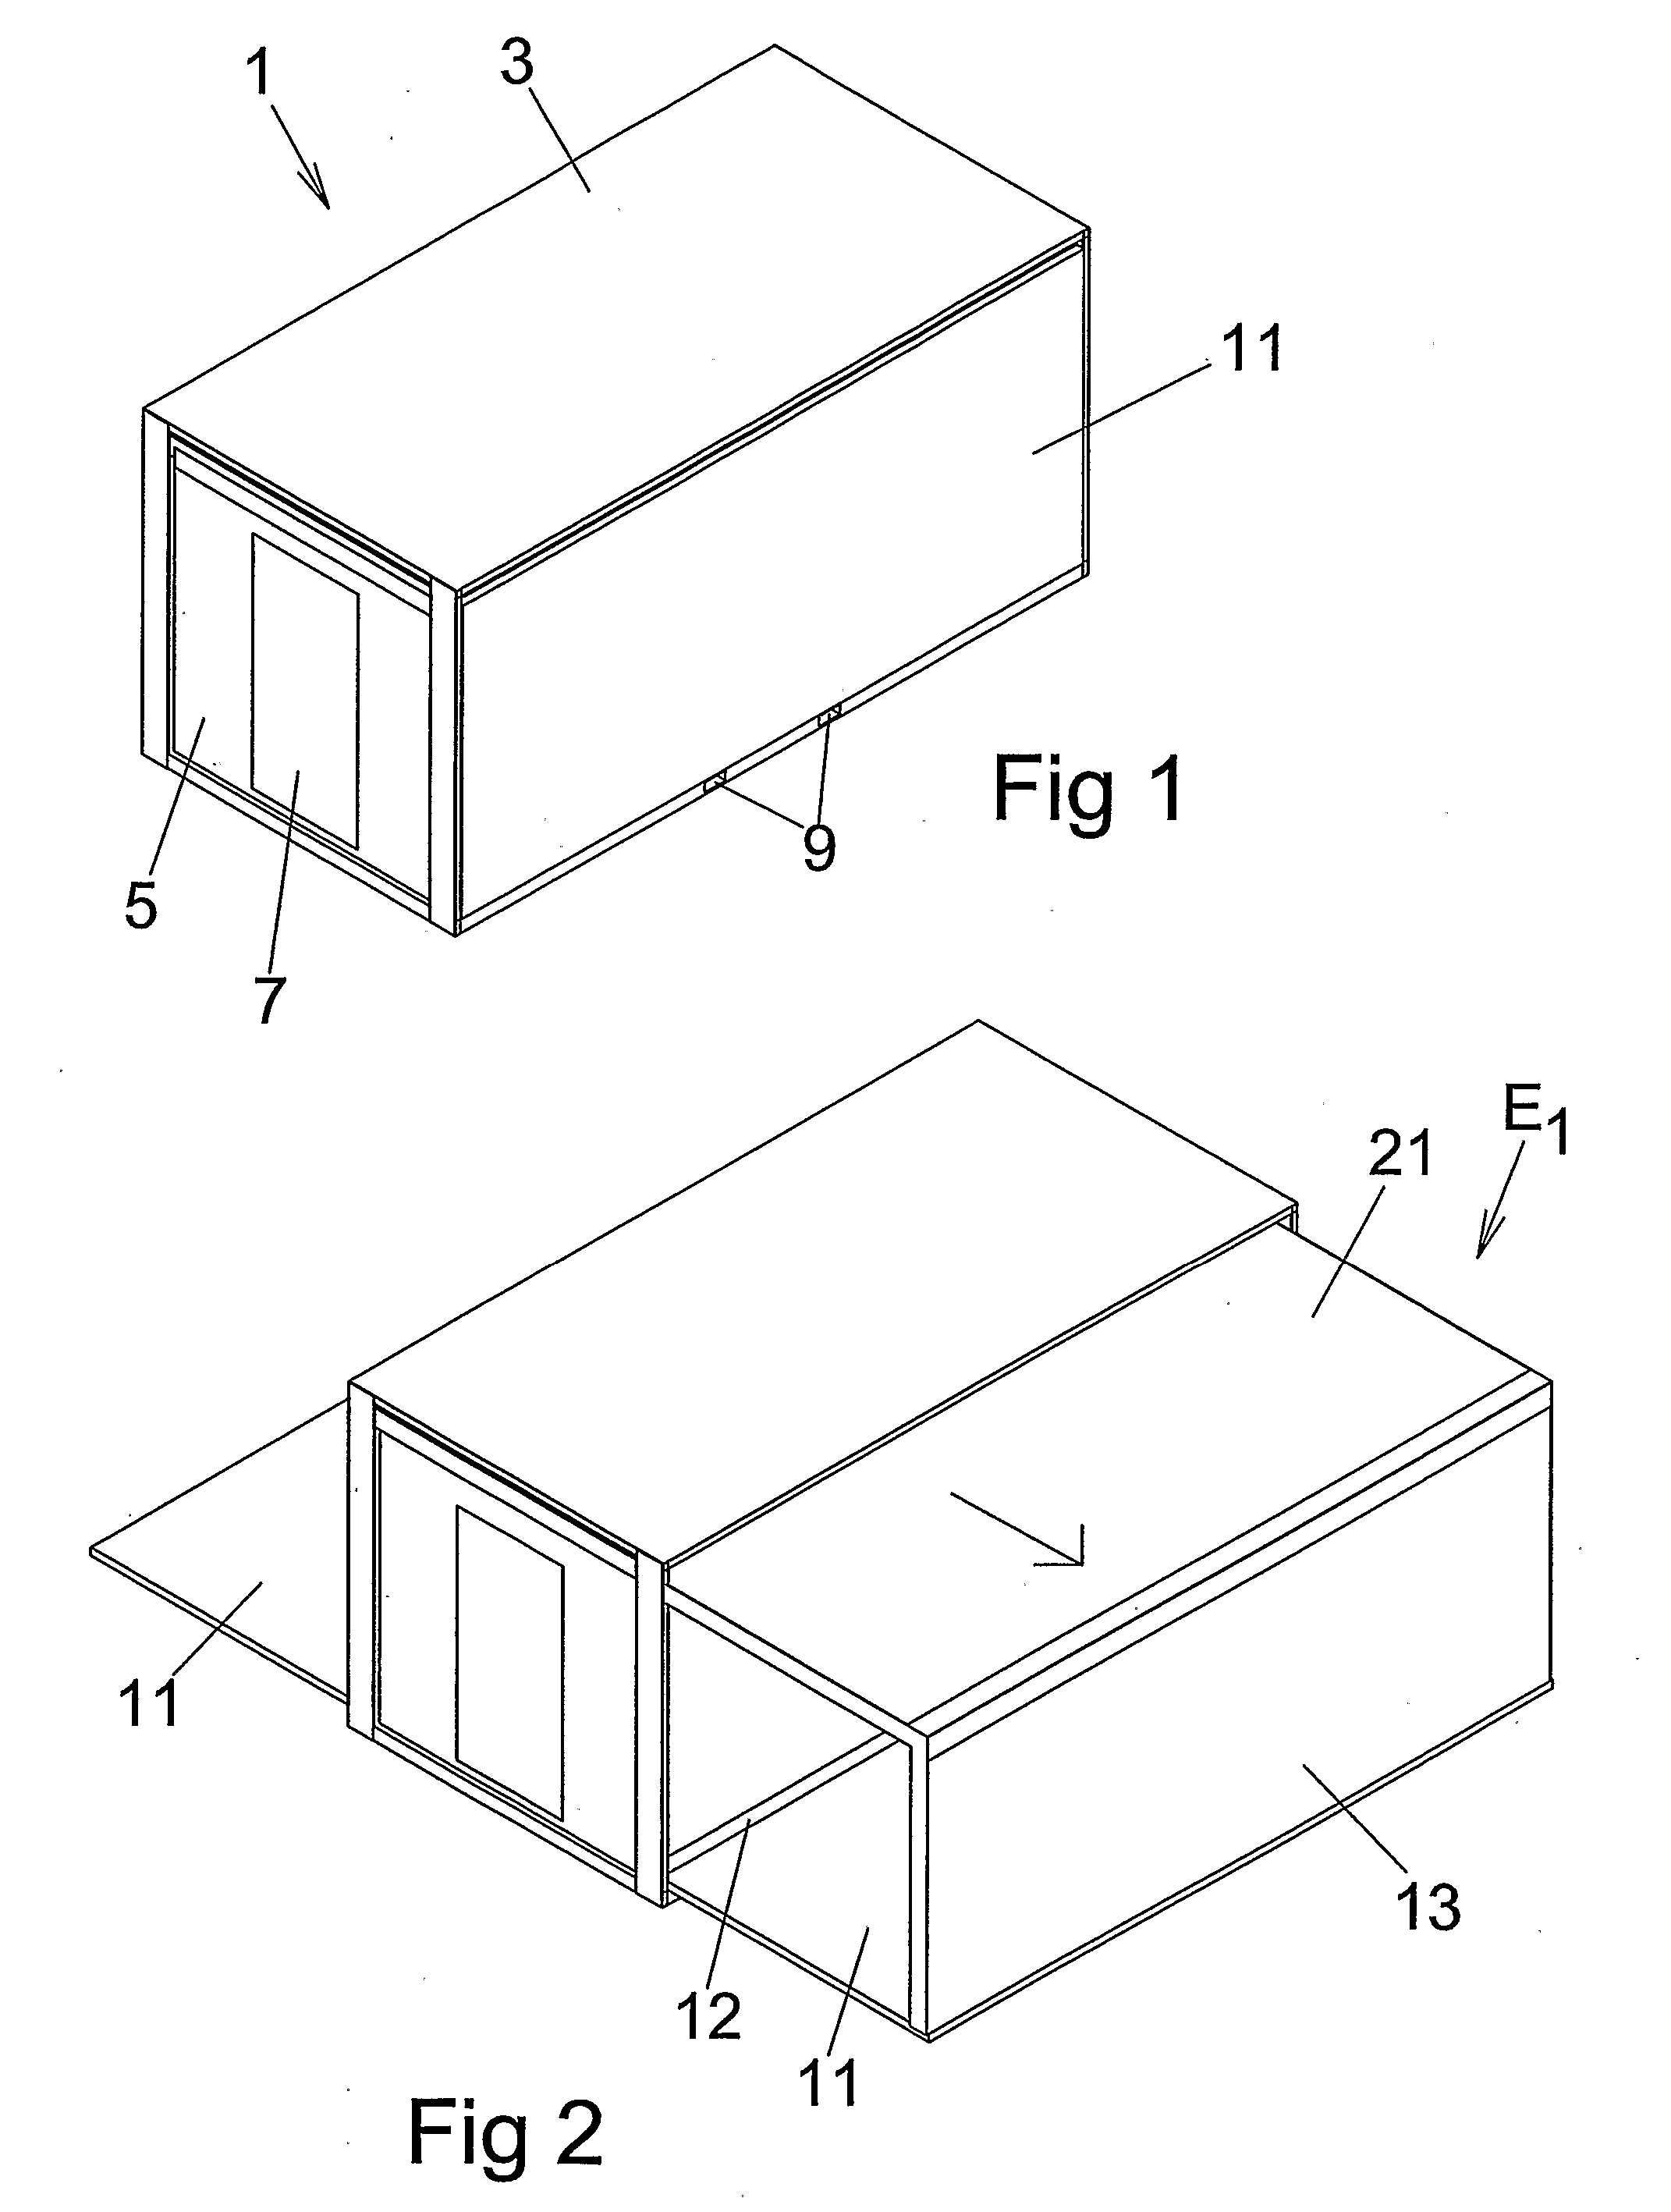 Expandable container